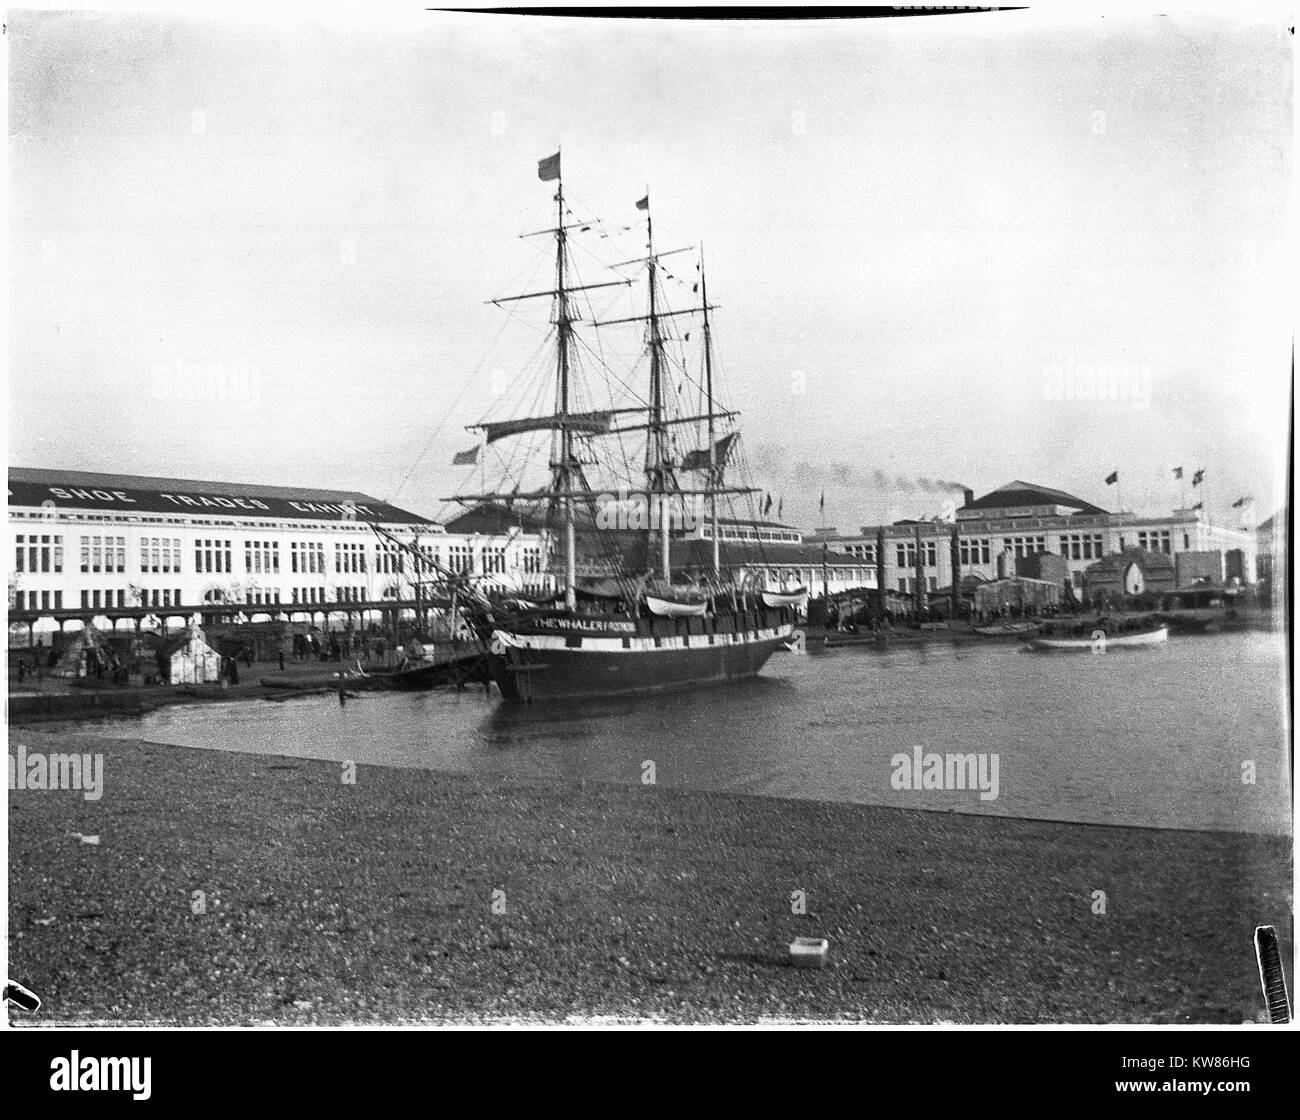 The Whaler Princess at the Chicago World's Fair Columbian Exposition. This world's fair was held in Chicago, Illinois from May 1 to October 30, 1893. Image from original camera nitrate negative. Stock Photo